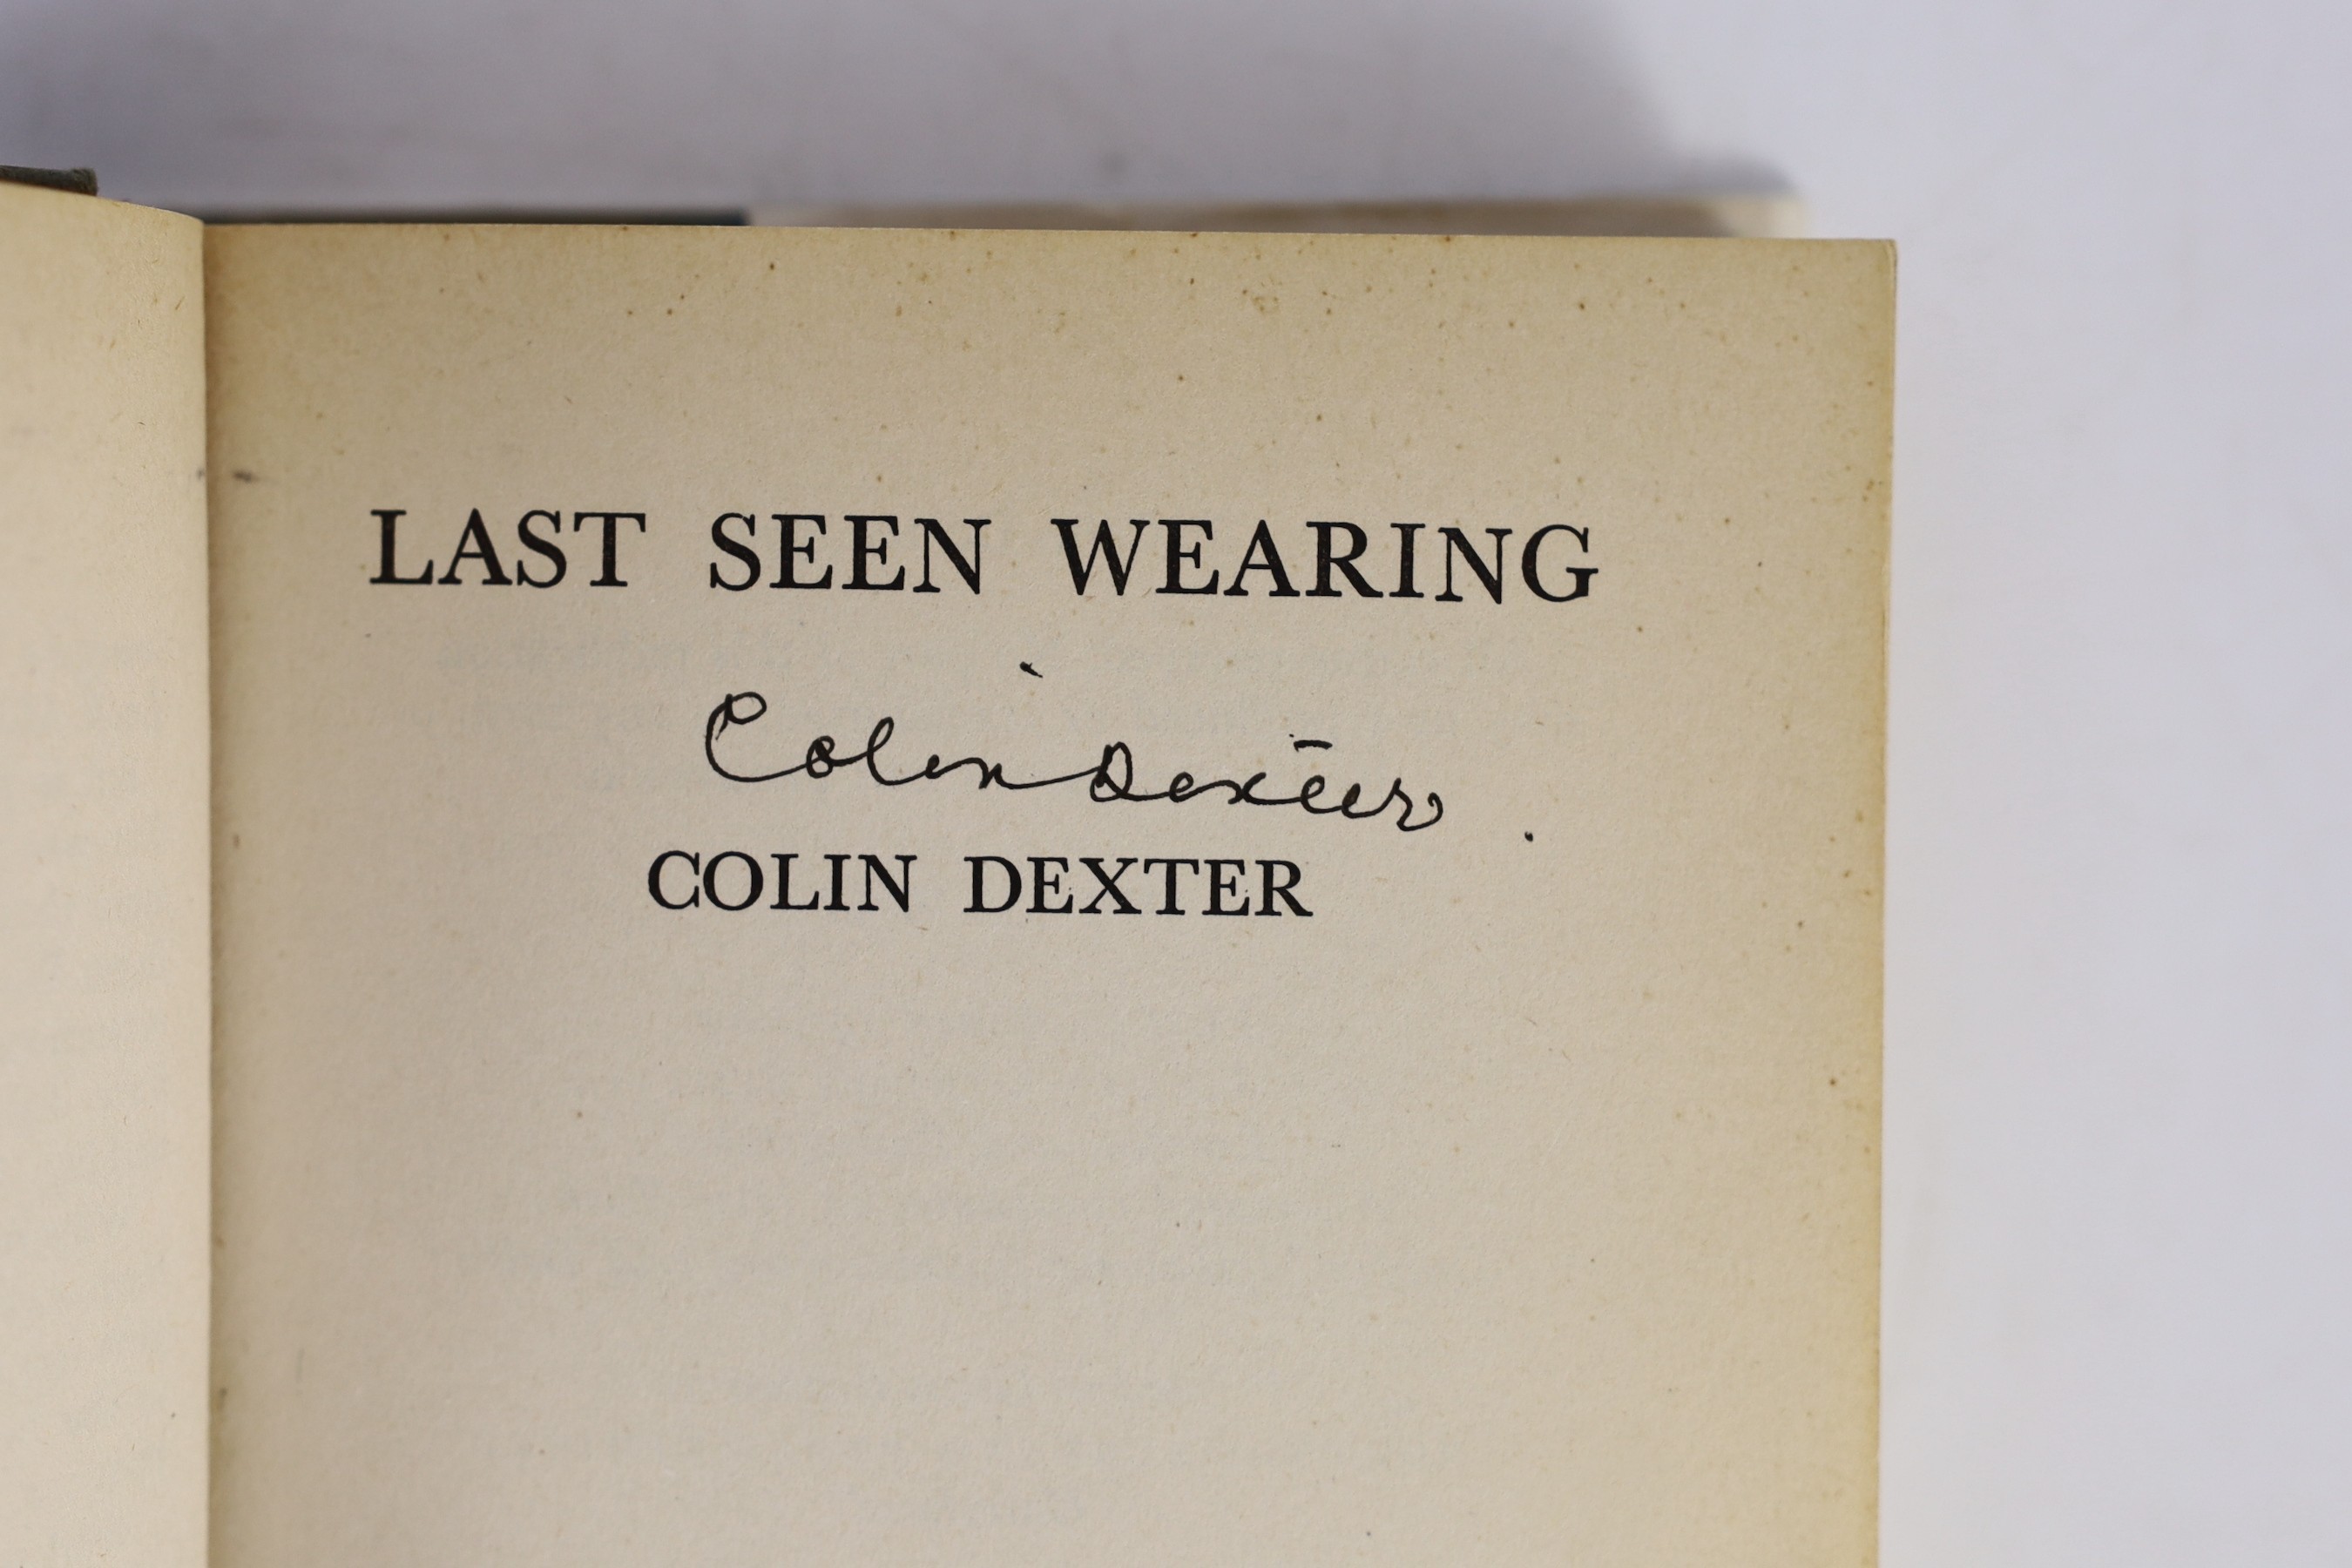 Dexter, Colin - Last Seen Wearing, 1st edition, signed on title page by author, 8vo, original cloth in unclipped d/j, with usual uniform page yellowing to text block and edges, Macmillan, London, 1976